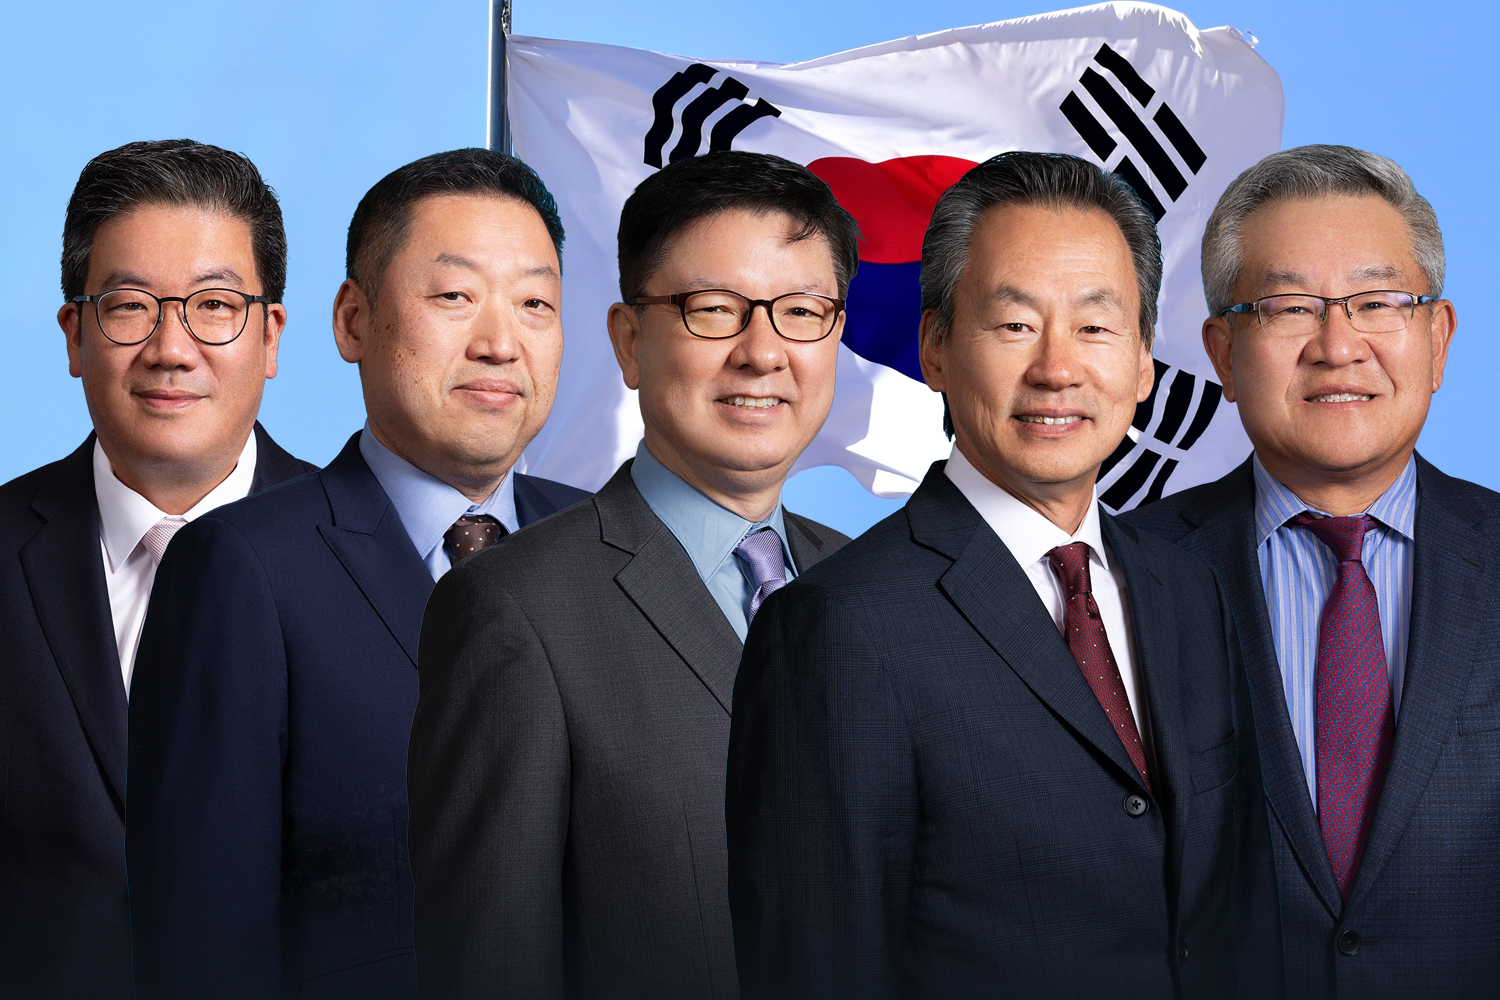 Portraits of top officers from the Korean American Dental Association